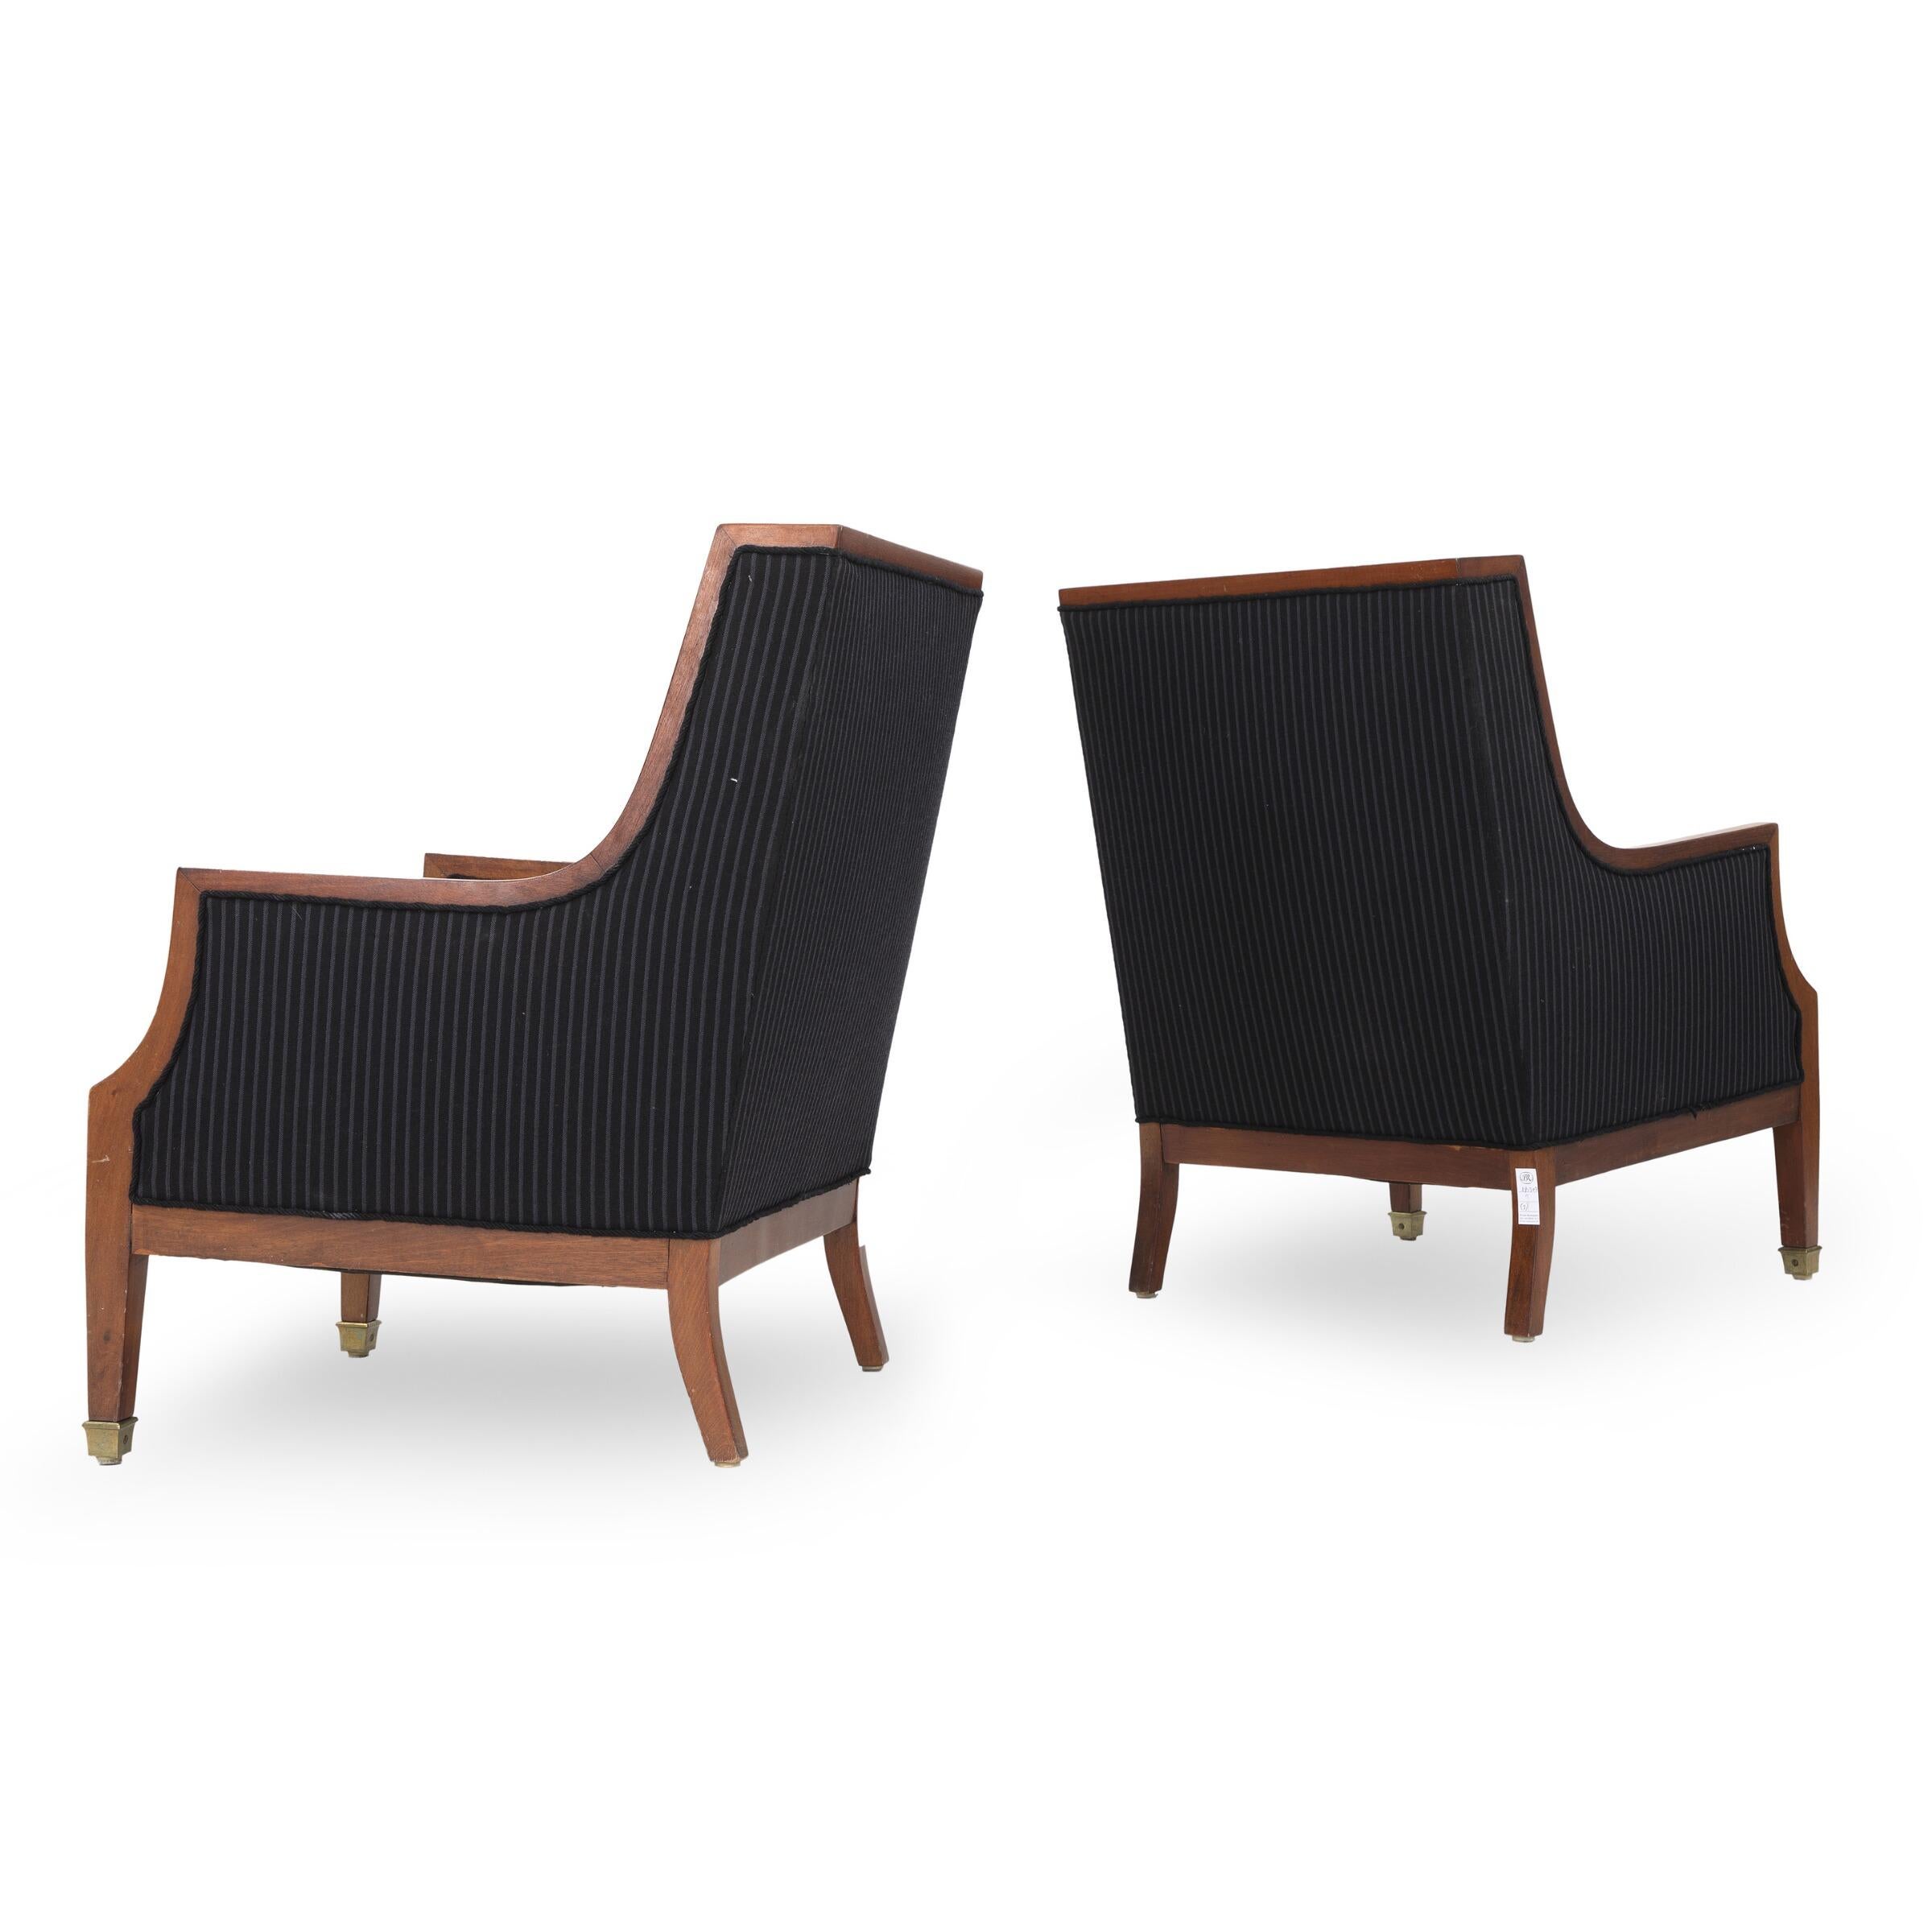 A pair of Danish armchairs of mahogany, front legs with brass shoes. Seat and back upholstered with black striped wool, 1930s-1940s.